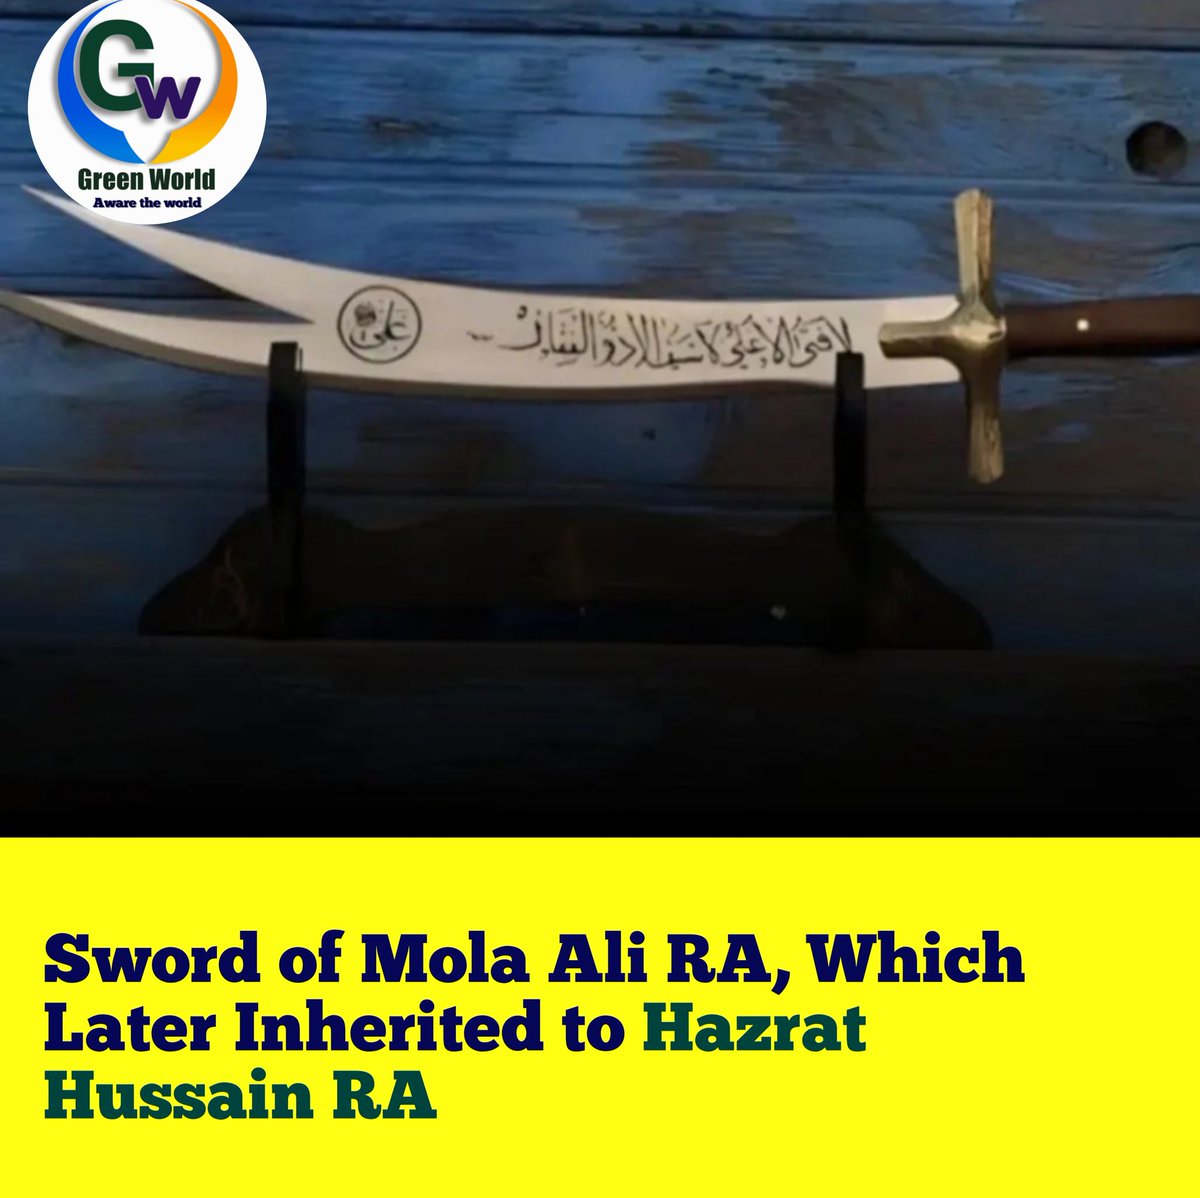 This is the Zulfiqar Sword, which was owned by Hazrat Ali RA, which later inherited to his son Imam Hussain RA.

This sword beloved by many for its legendary religious power and influence, is one of the most renowned swords in Islamic history.